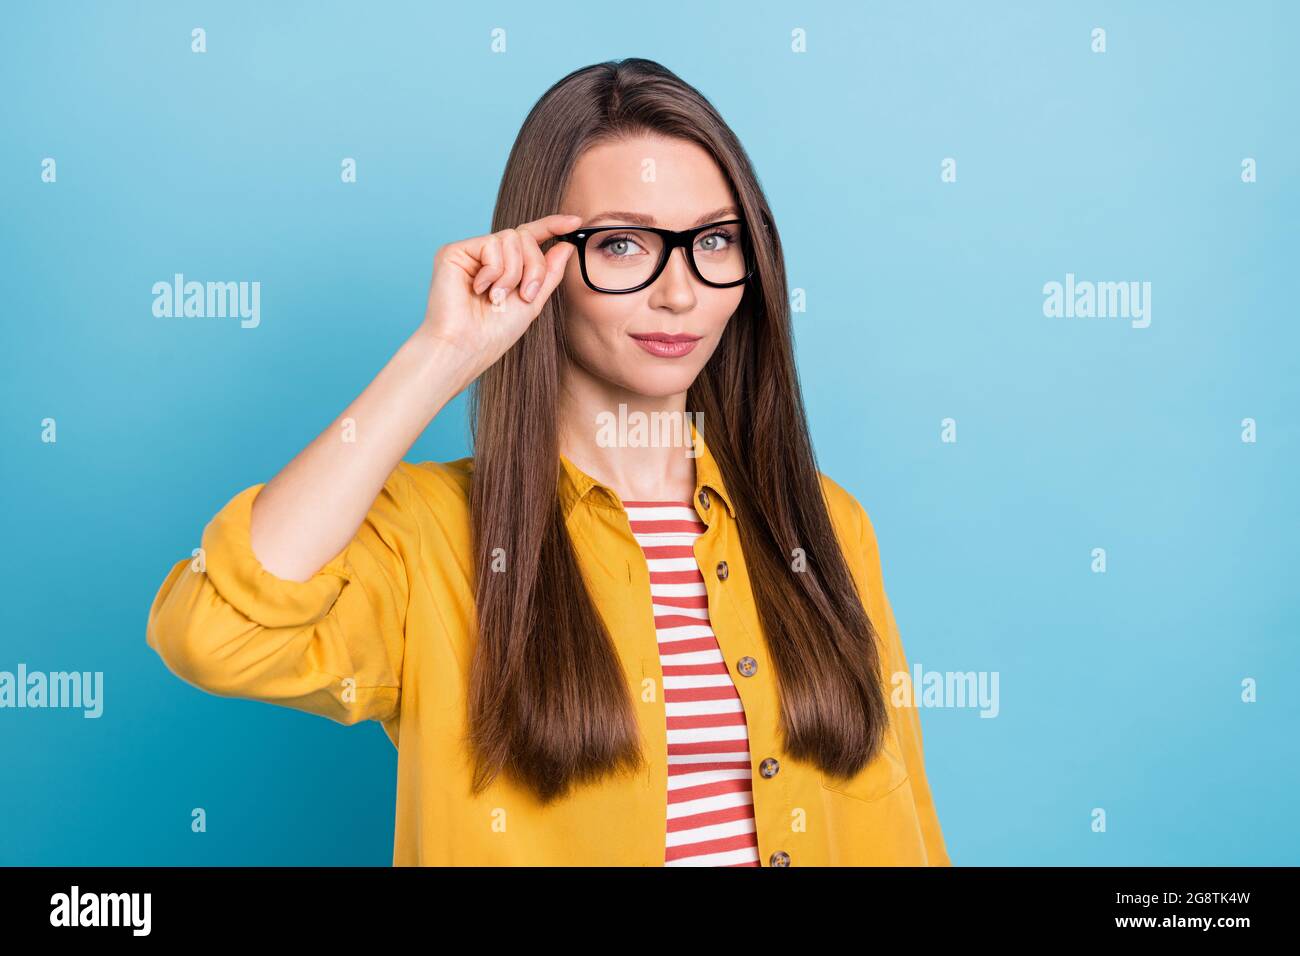 https://c8.alamy.com/comp/2G8TK4W/photo-of-young-attractive-woman-happy-positive-smile-hand-touch-eyeglasses-isolated-over-blue-color-background-2G8TK4W.jpg